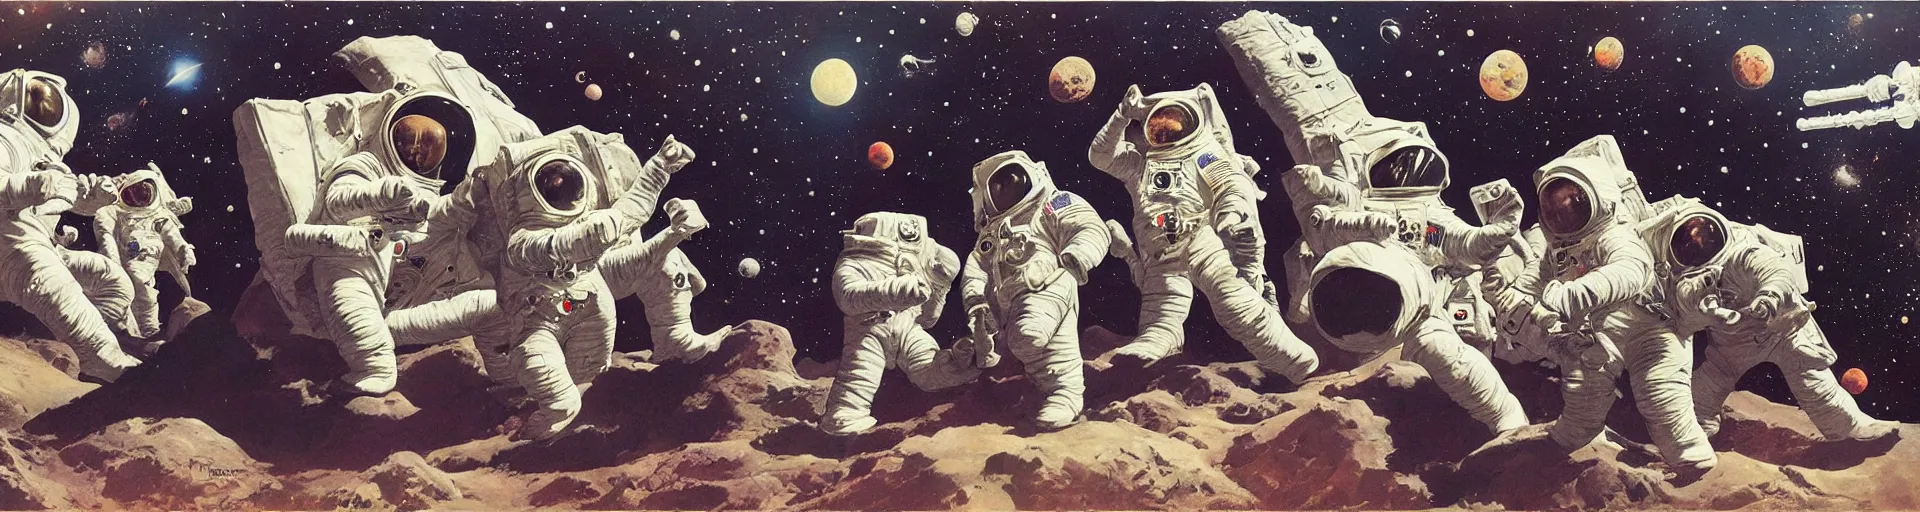 Prompt: astronauts playing music in the space by frank frazetta